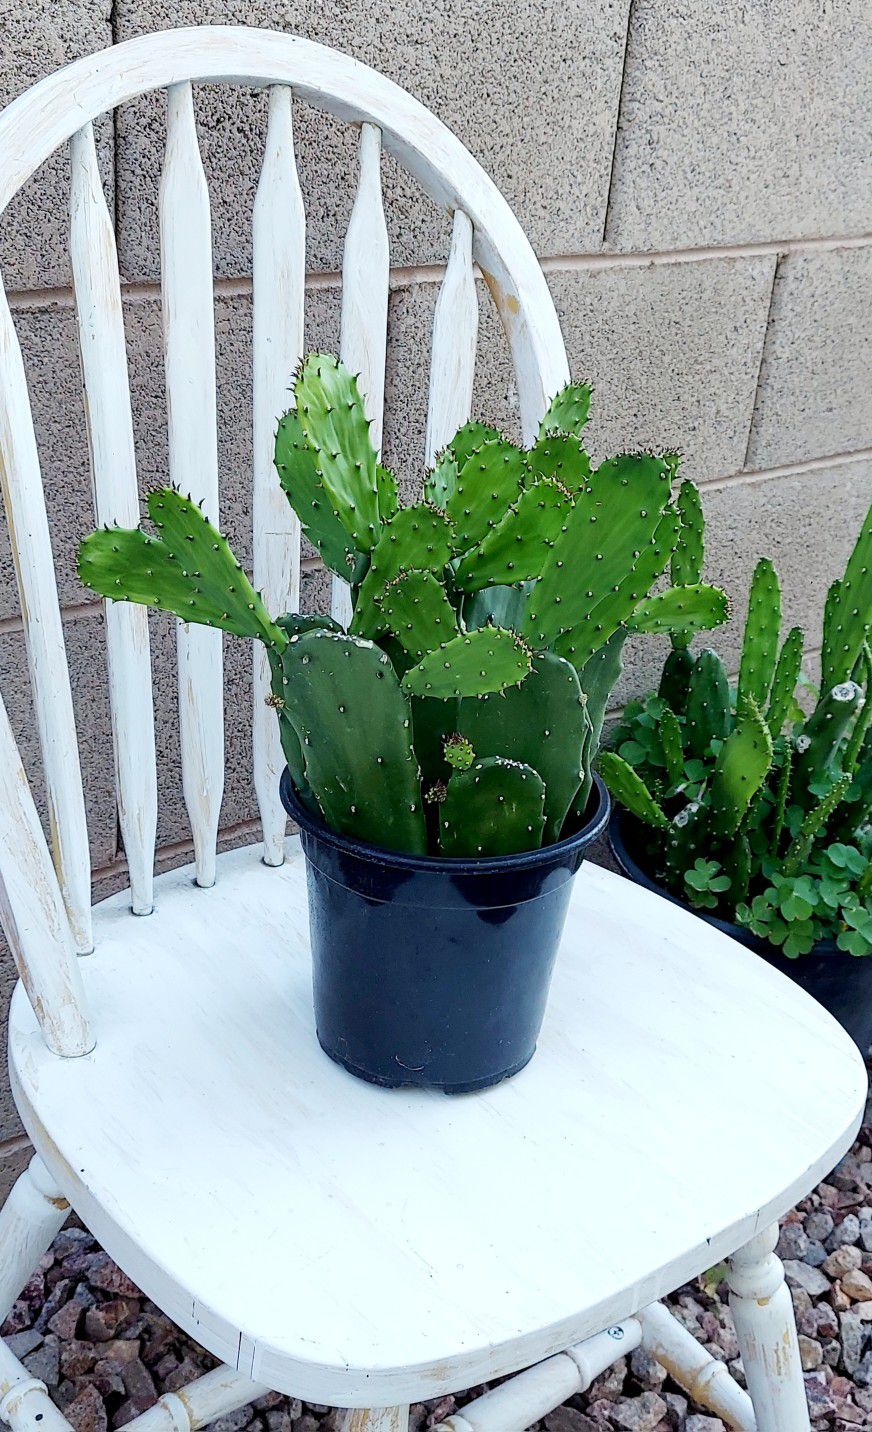 Living Plant 🌱20"H Opuntia Ficus-Indica on 7"H Pot ::: Outdoor